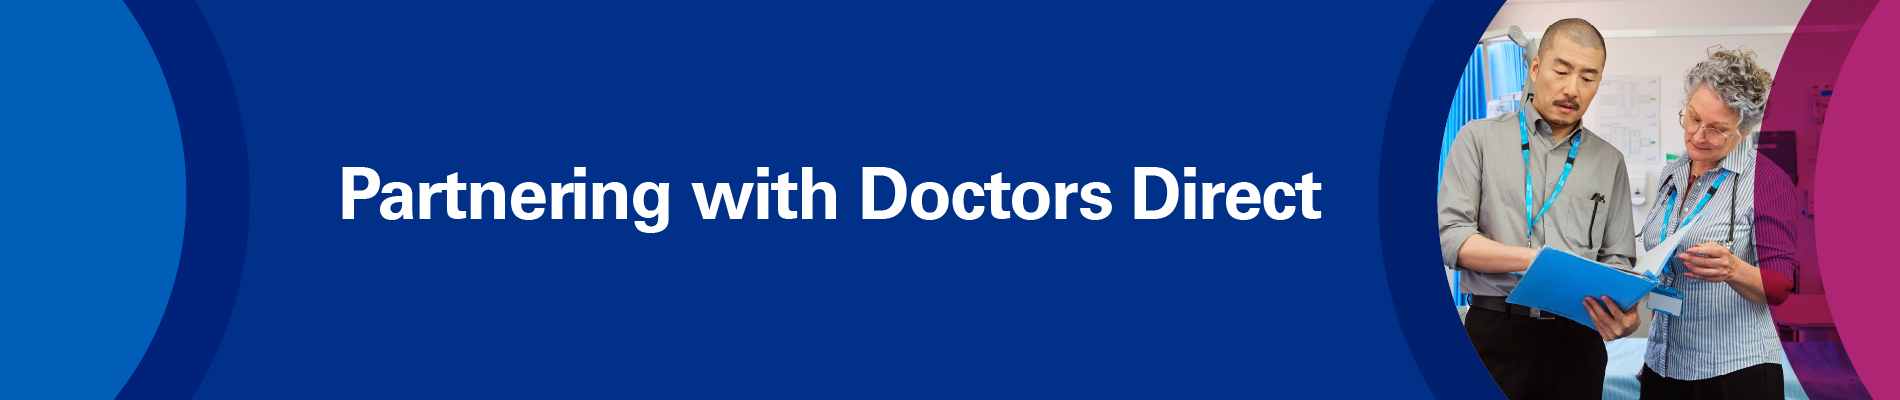 Partnering with Doctors Direct page banner